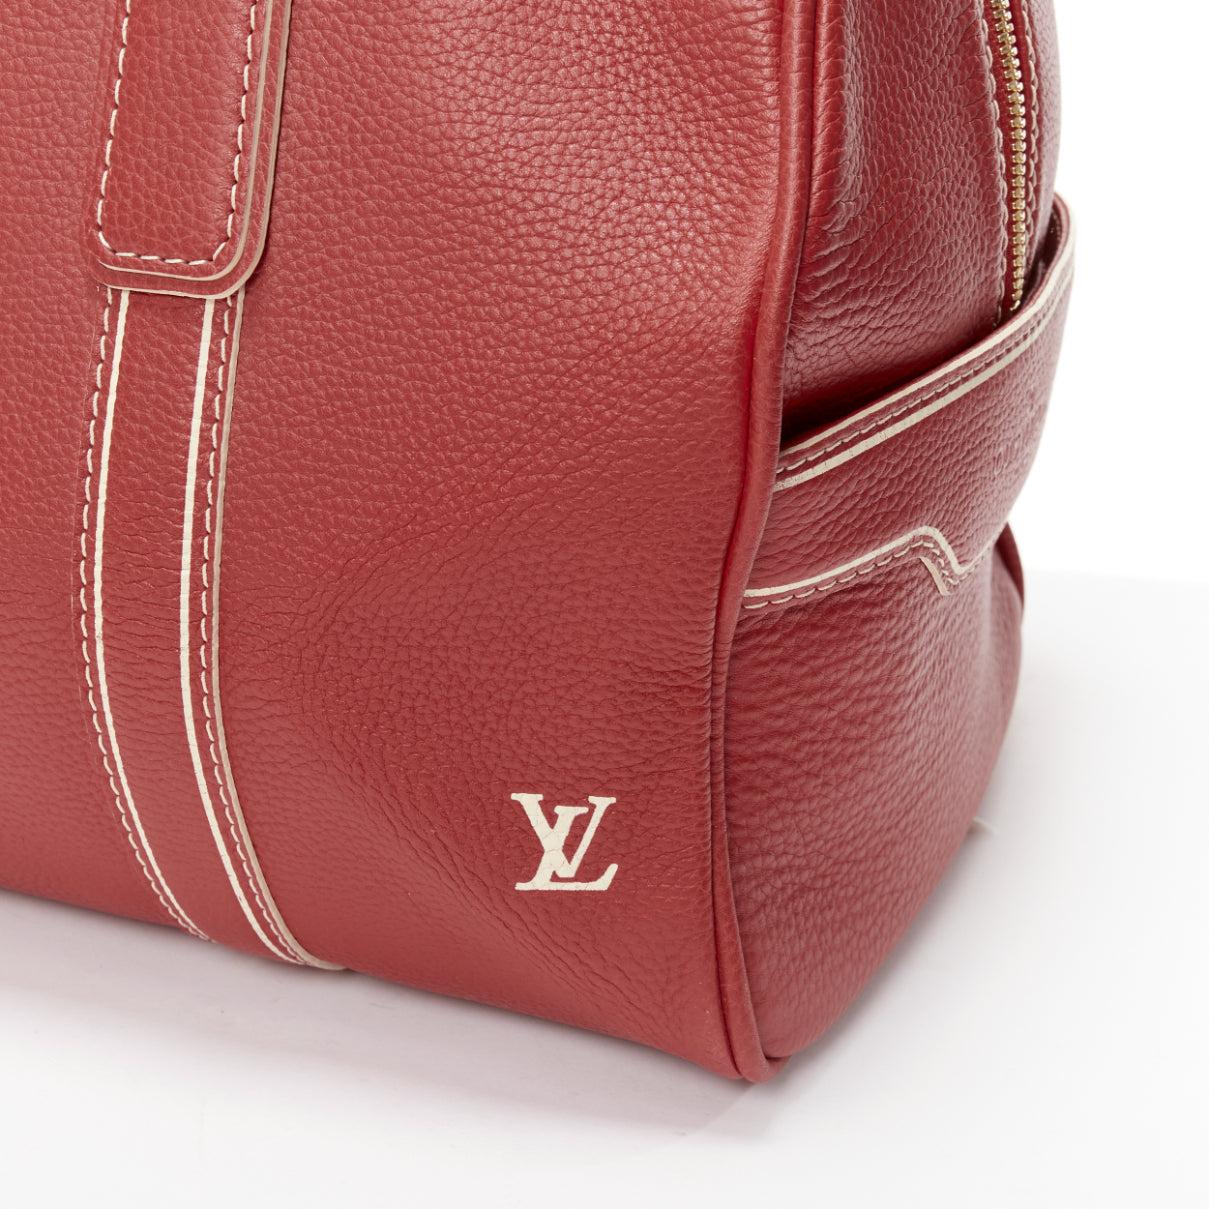 LOUIS VUITTON Red Tobaco Leather Carryall Boston Duffle top handle travel bag For Sale 4